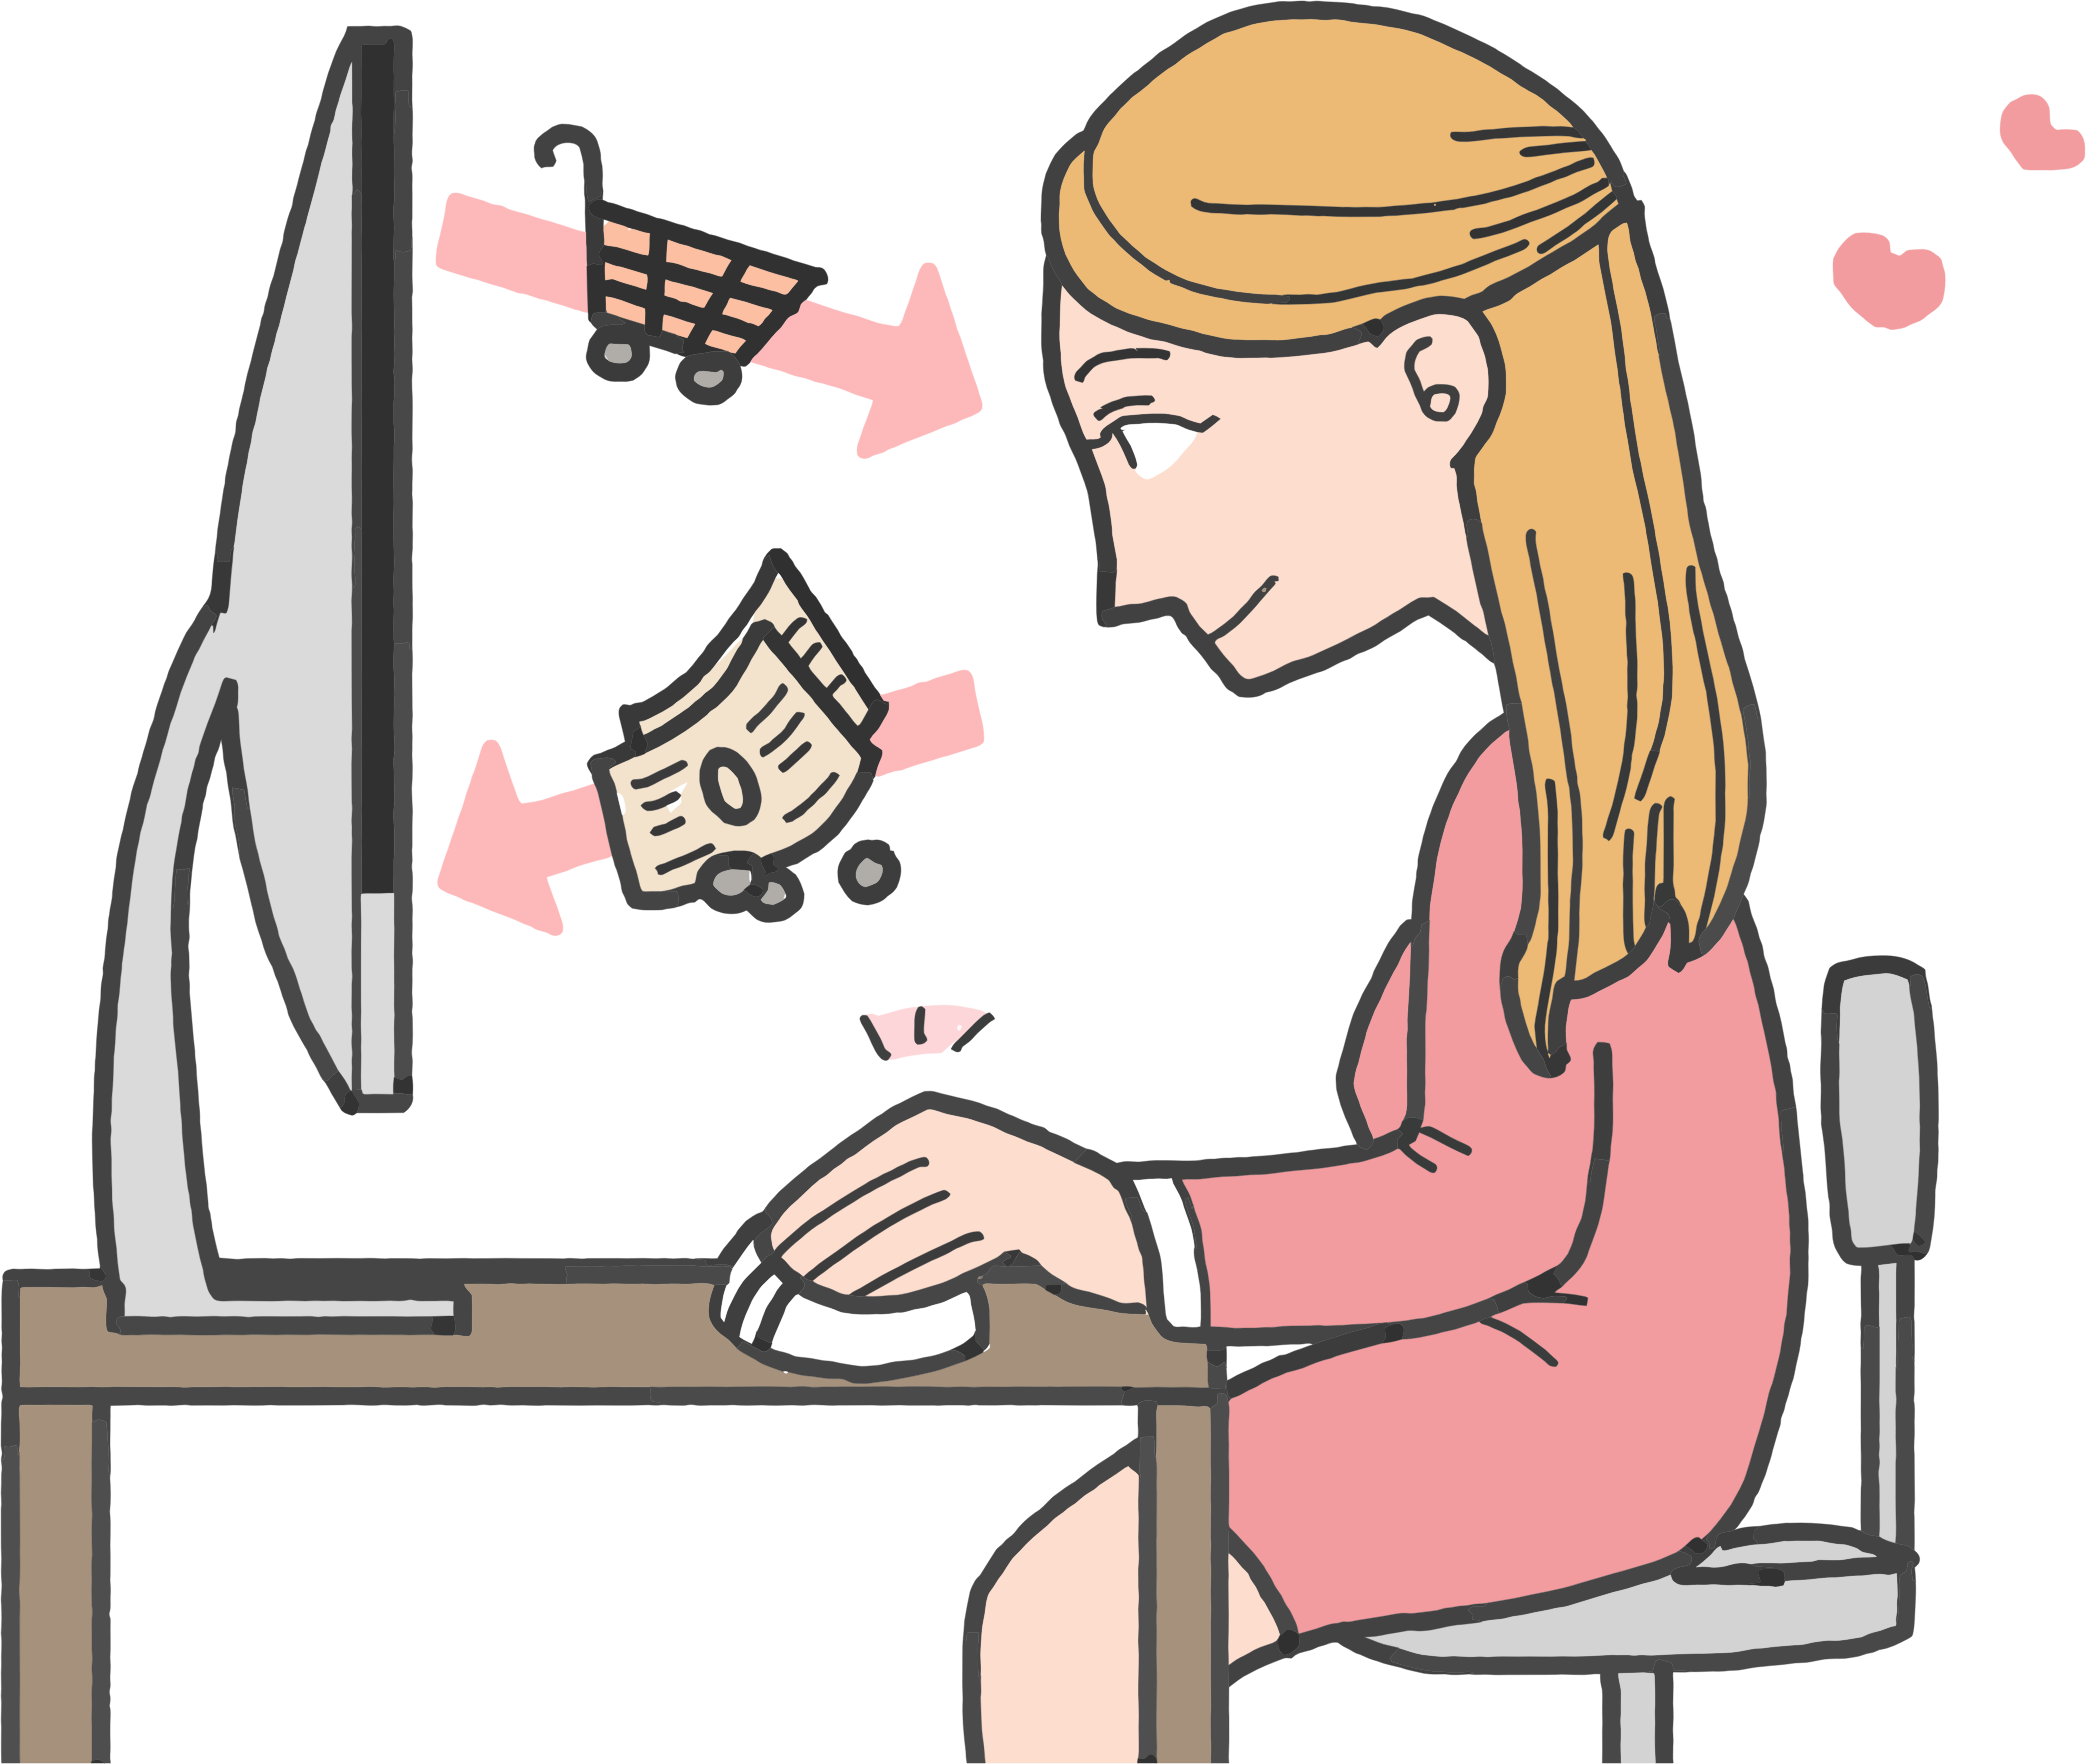 computers clipart shopping